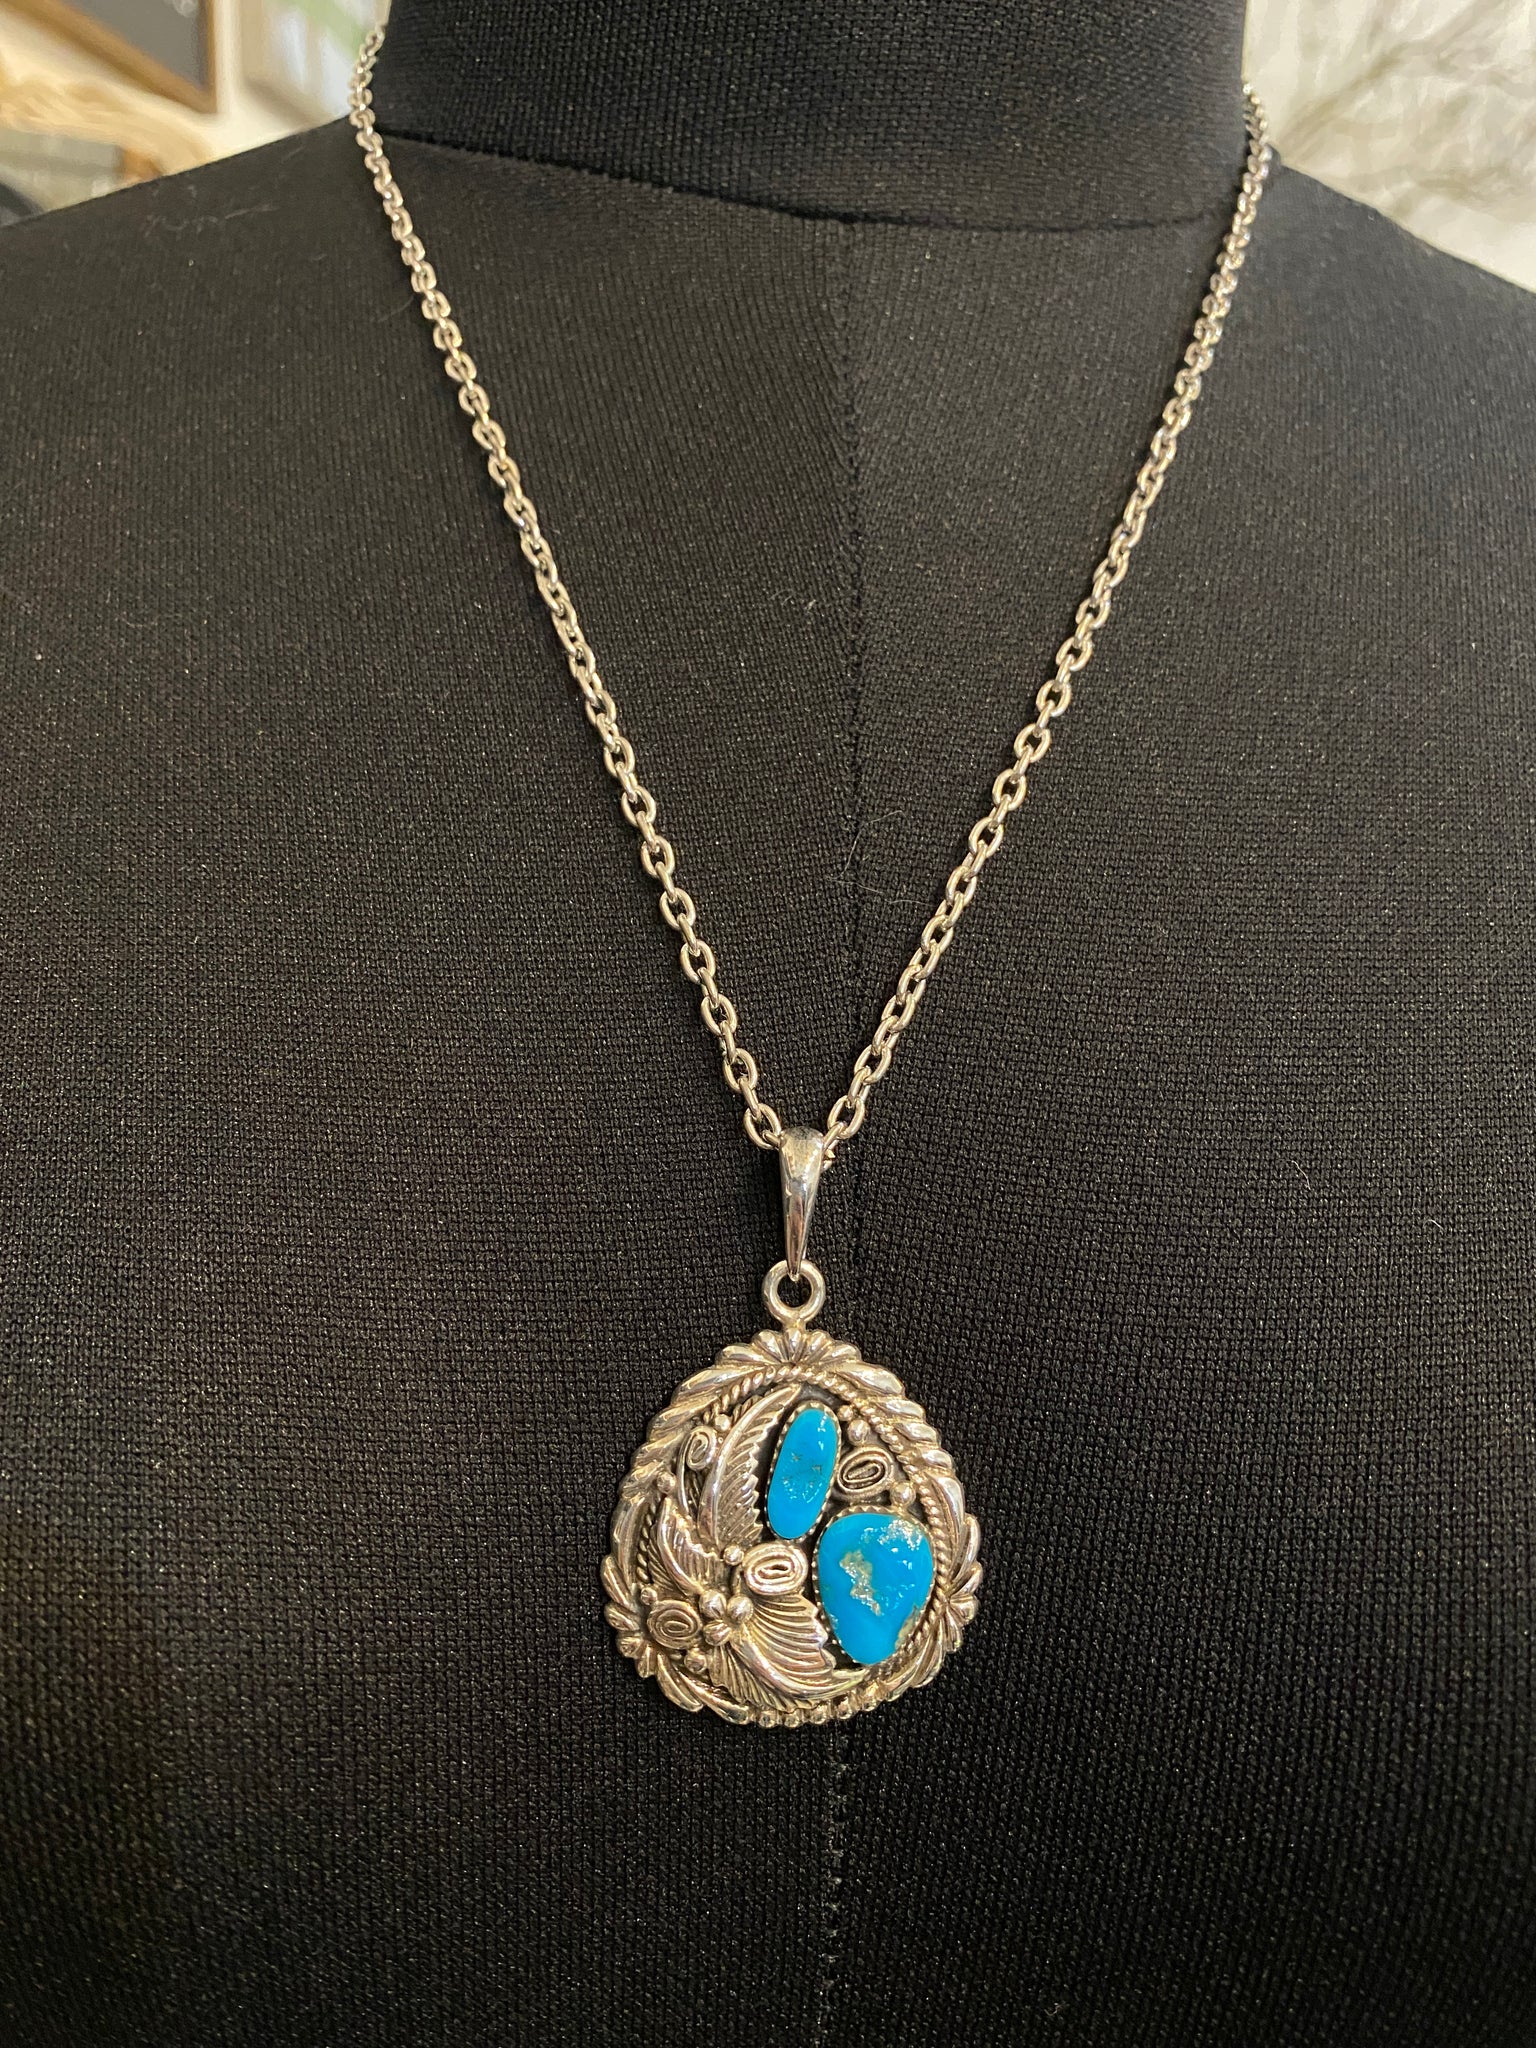 Beautiful Turquoise Charm Pendant with Link Chain Necklace